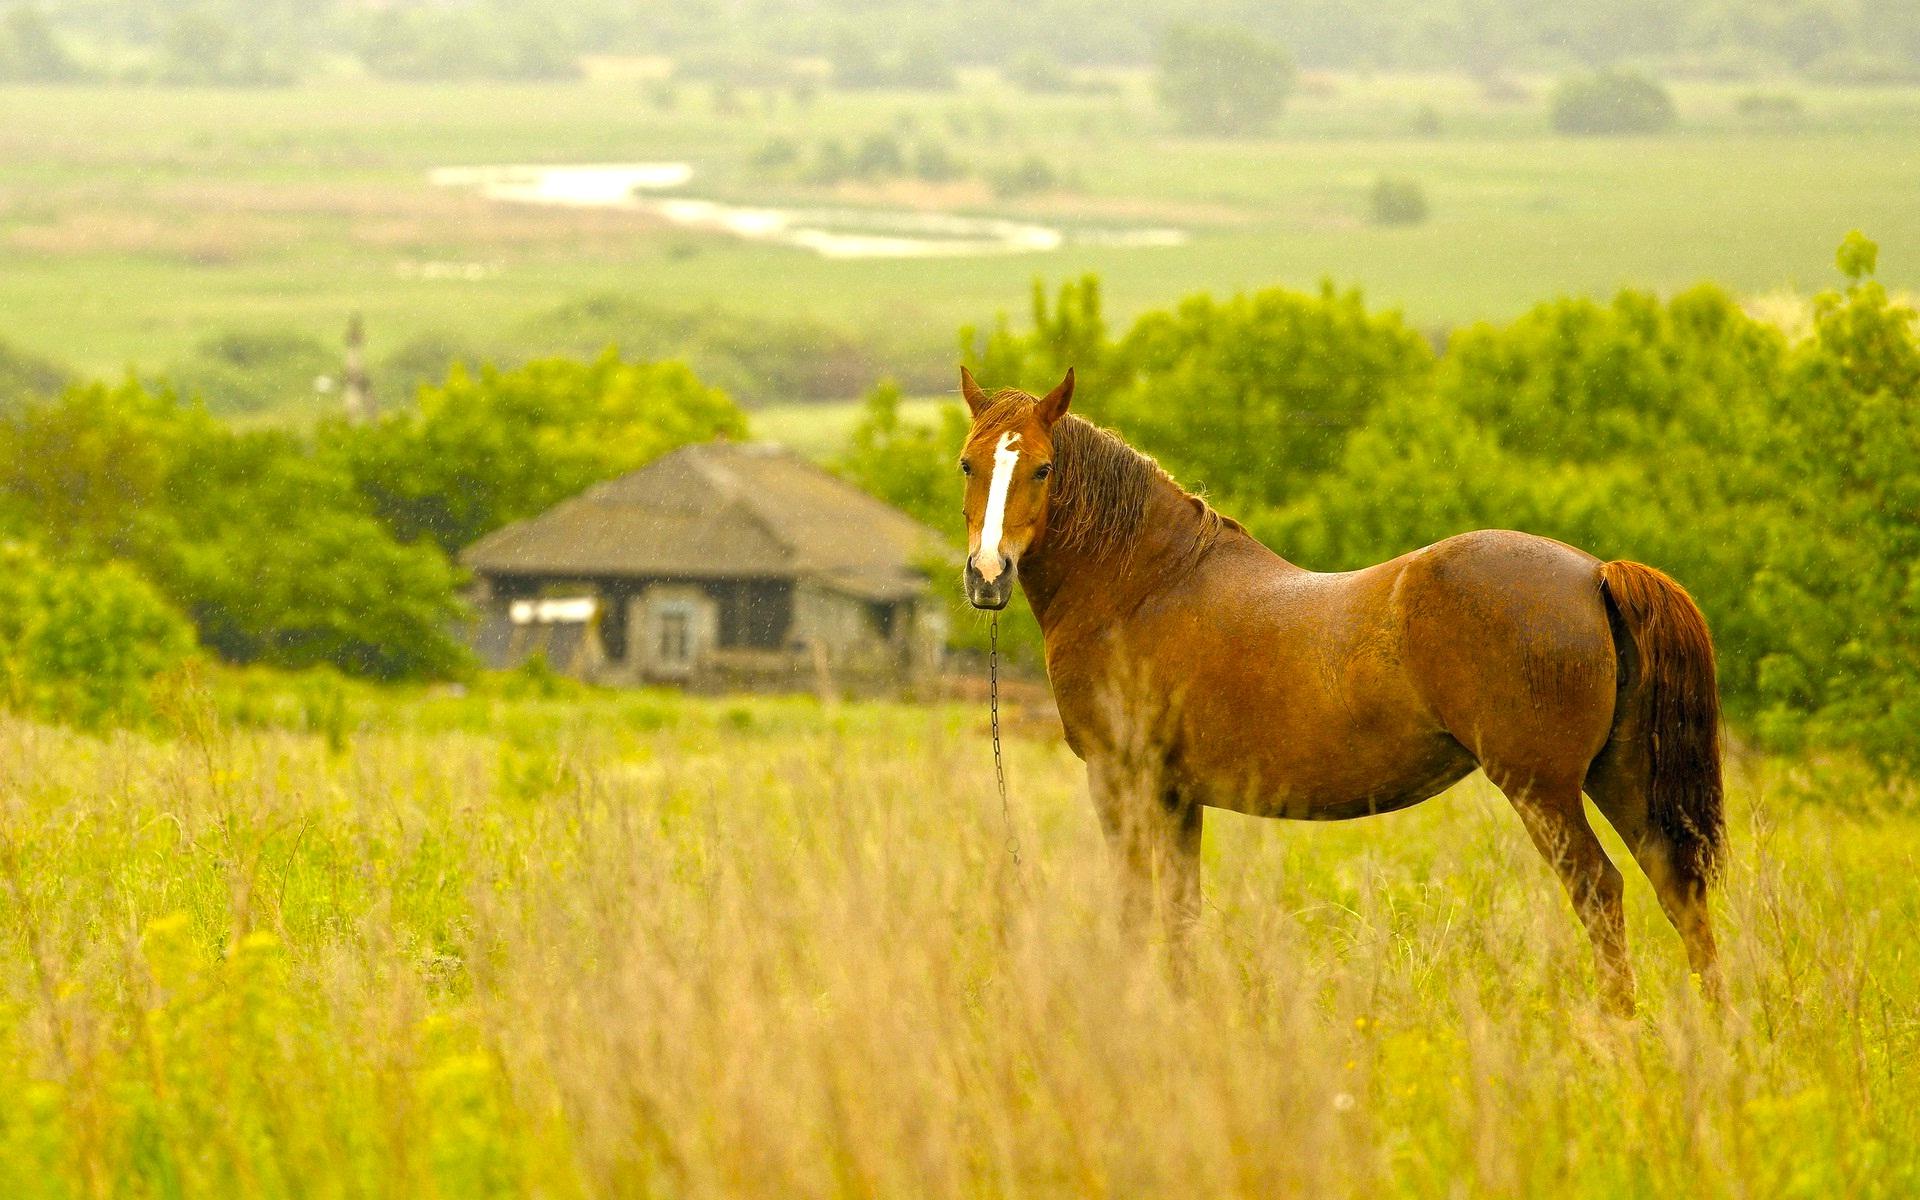 Horse Animal Facts With Image Wallpaper For Desktop